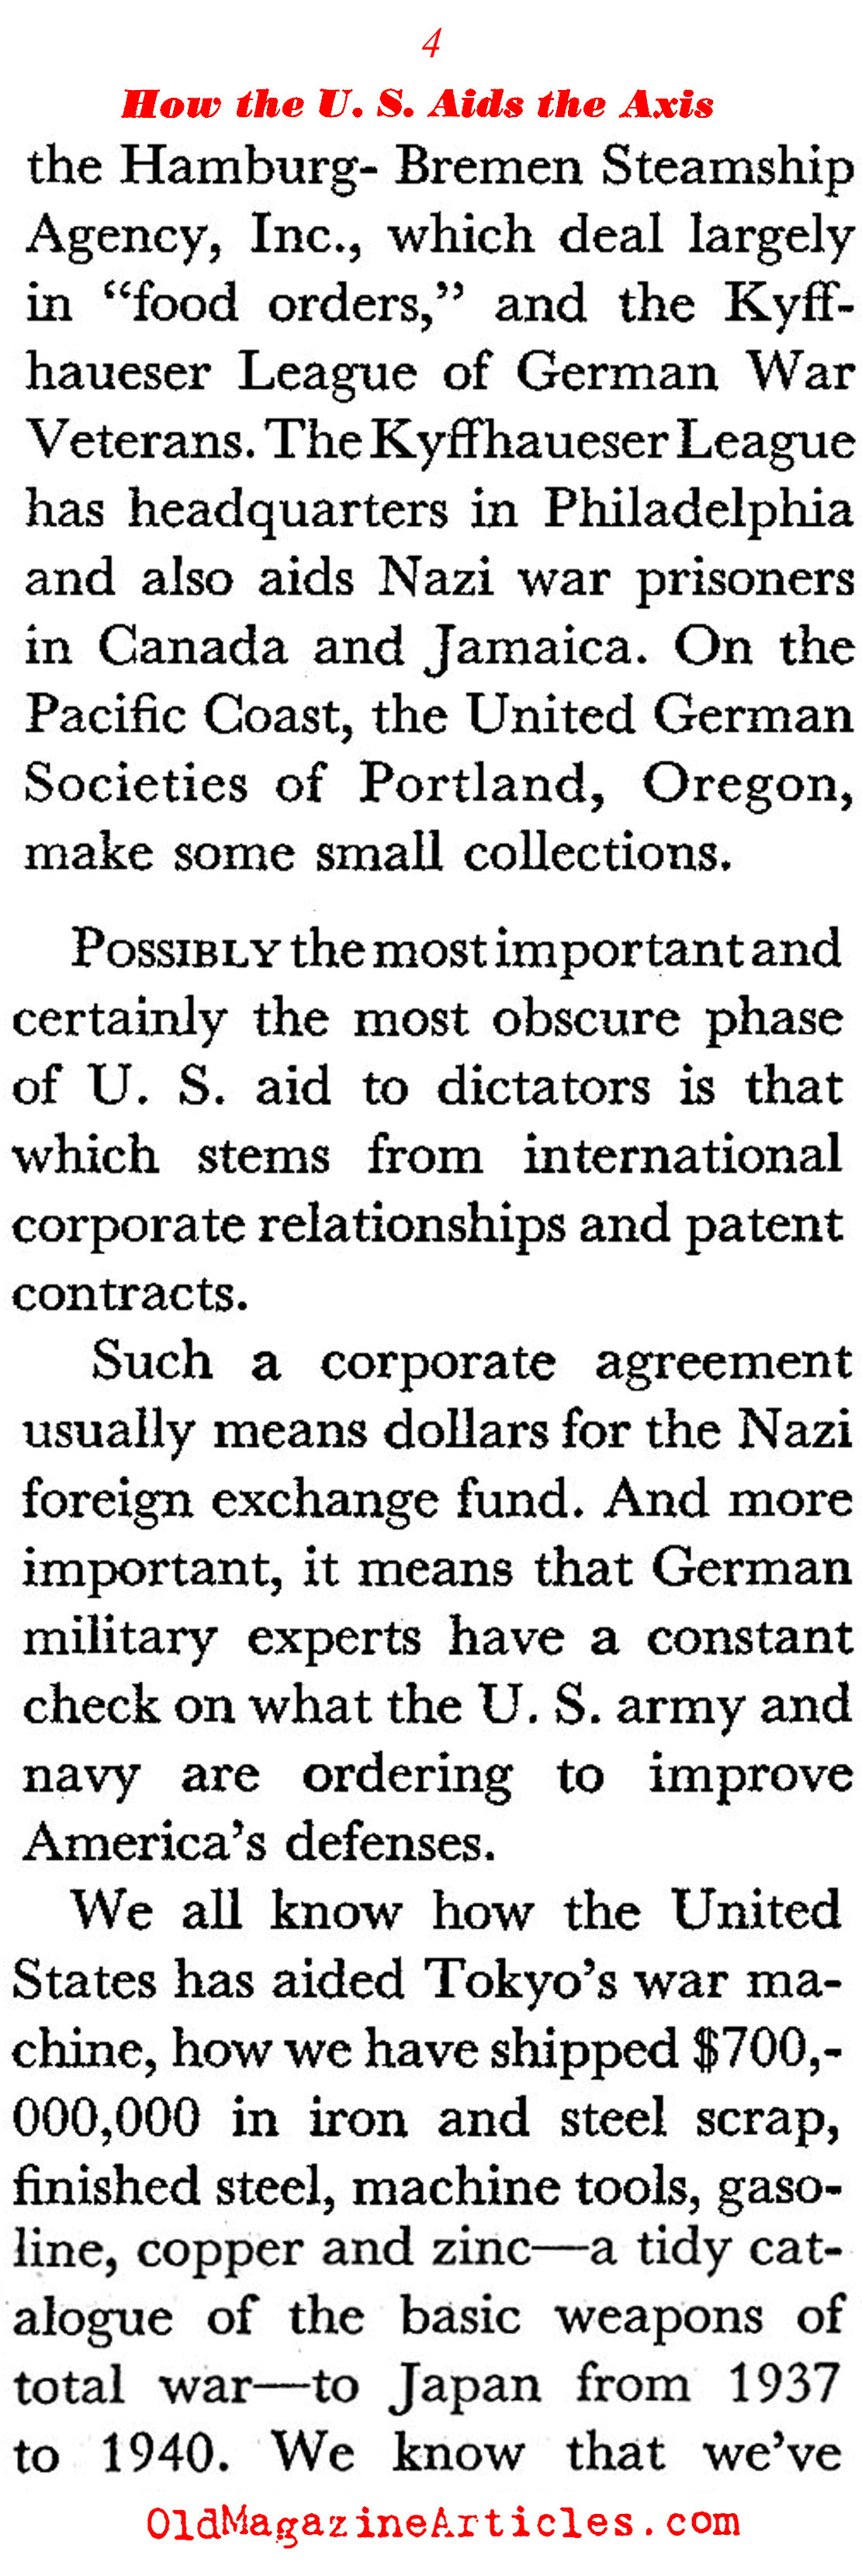 How the US Helped the Fascists Before Entering the War (Coronet Magazine, 1941)